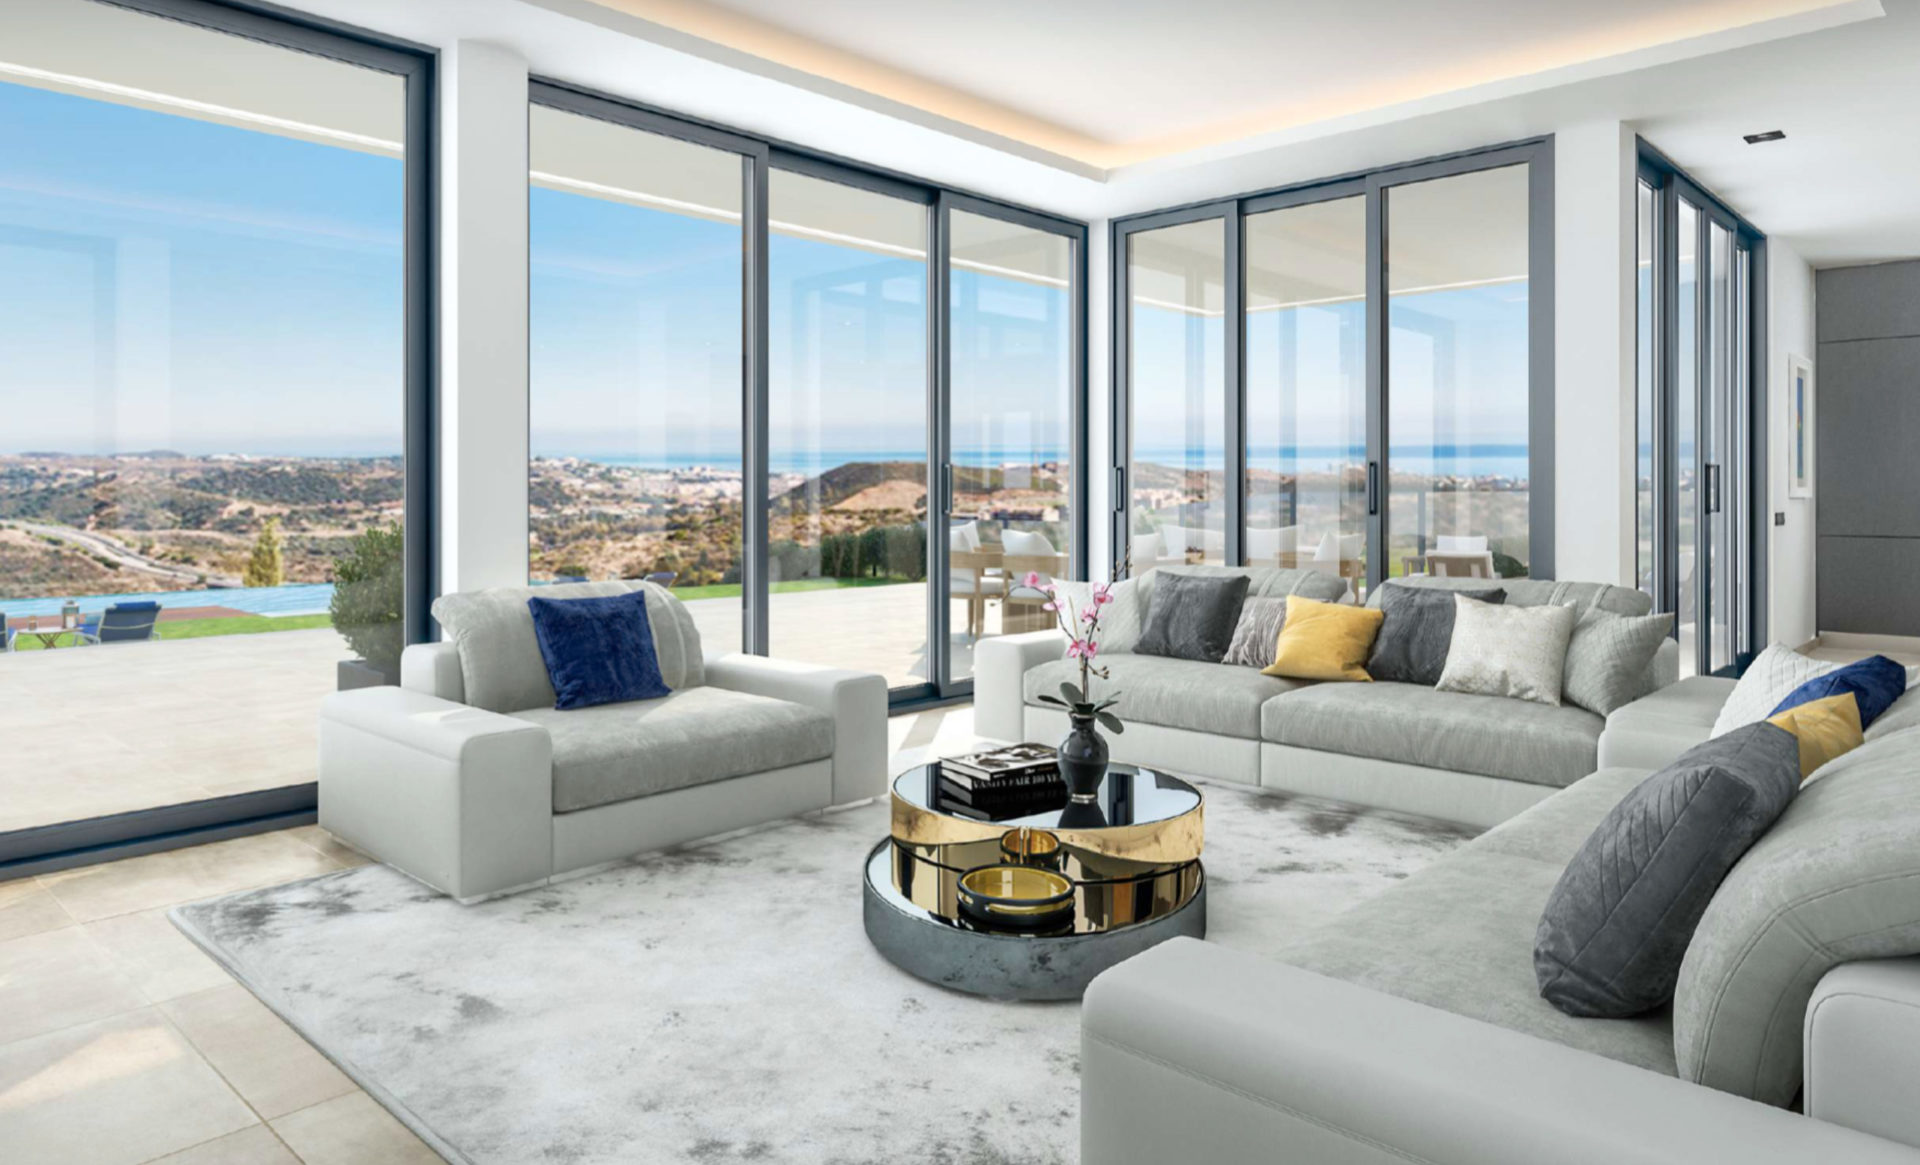 LUXURIA LIFESTYLE INTERNATIONAL WELCOMES LV REAL ESTATE